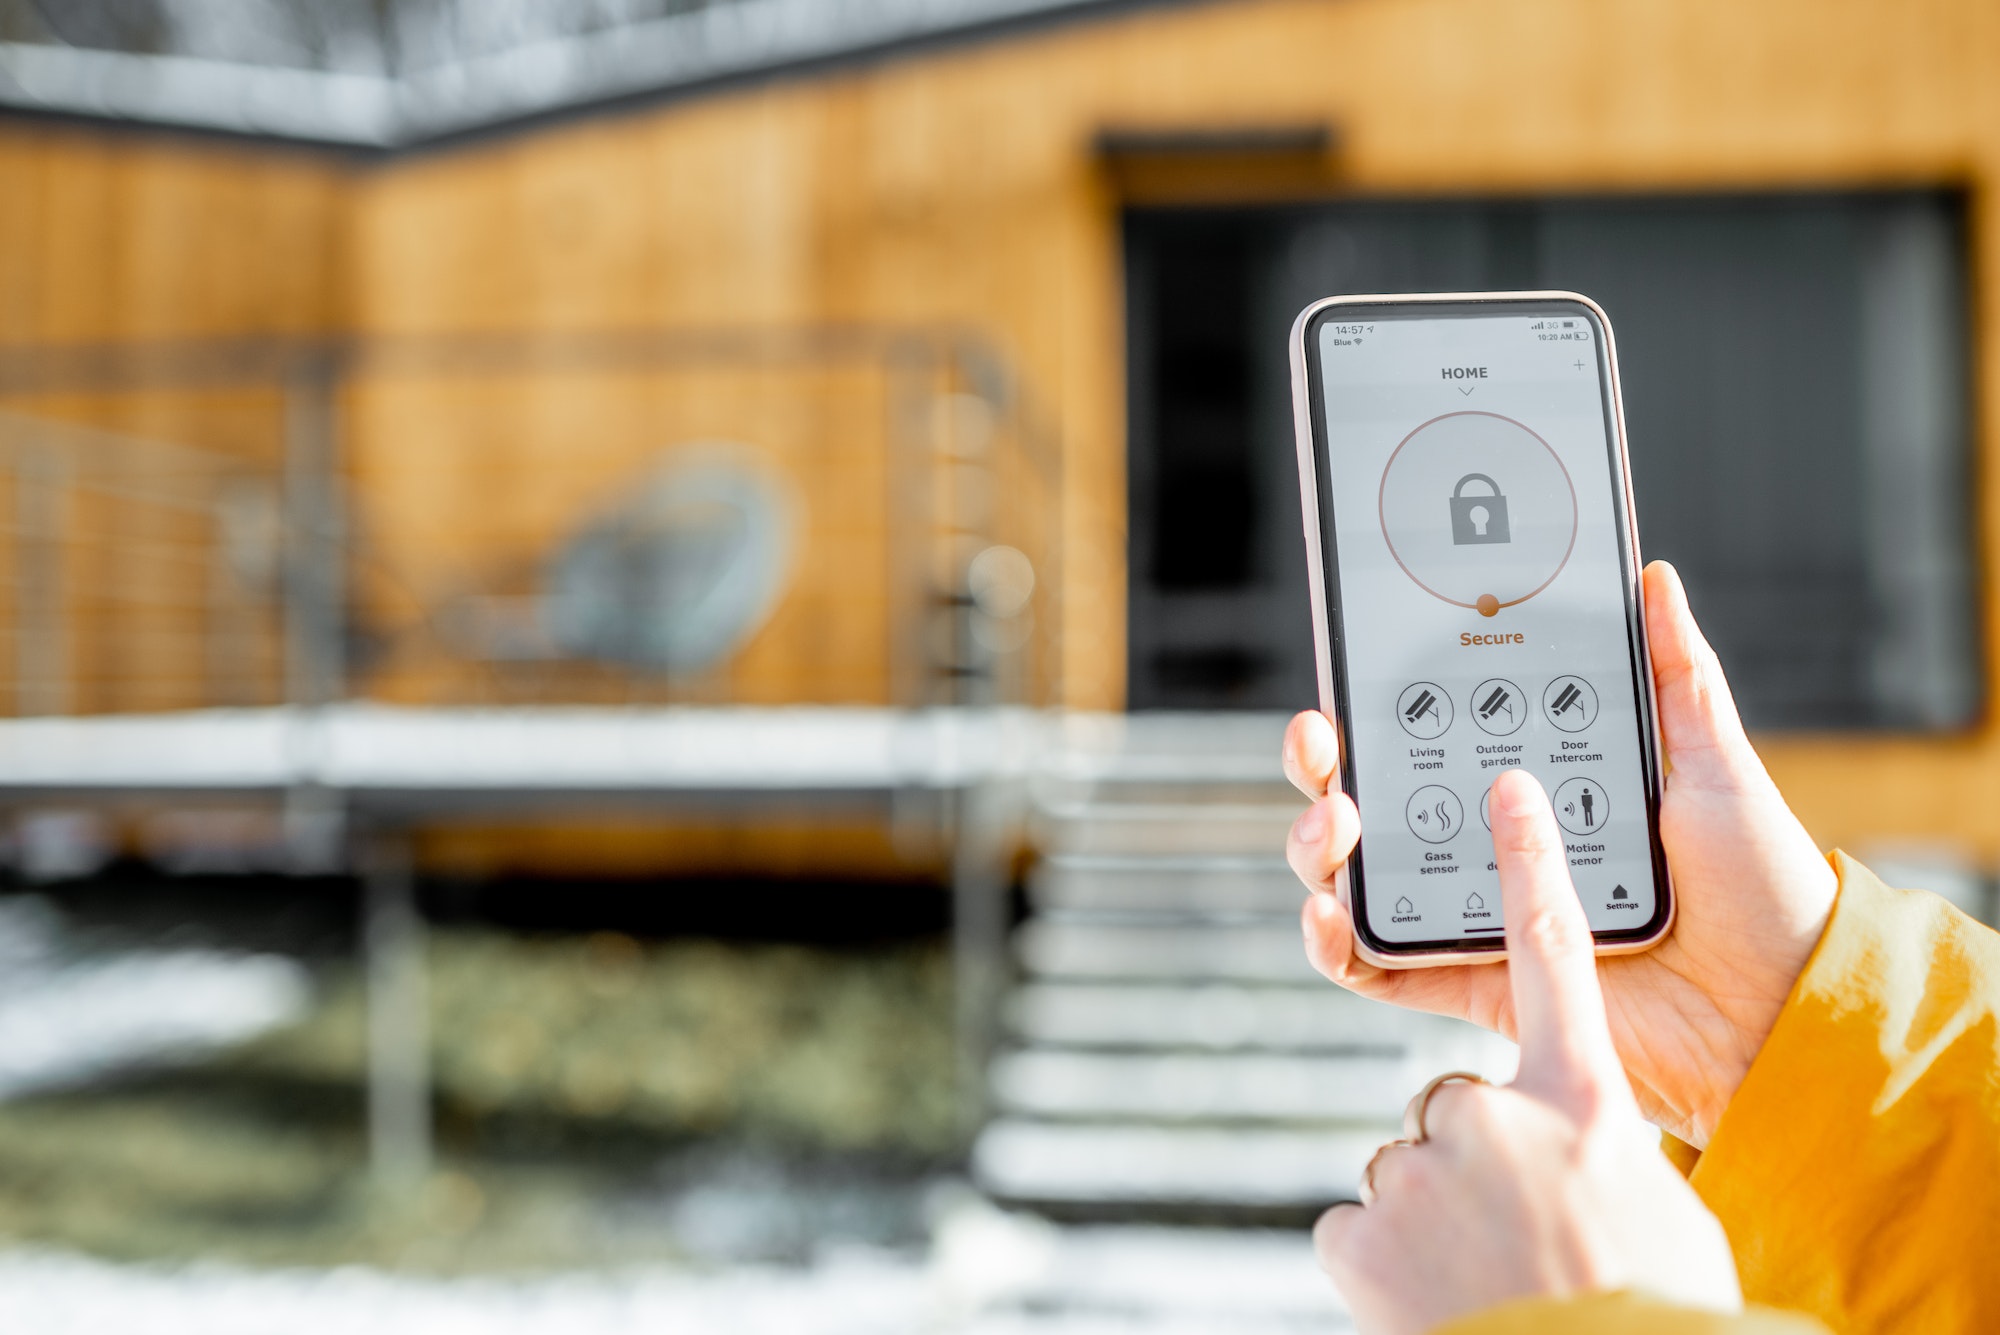 Controlling home security from a mobile device